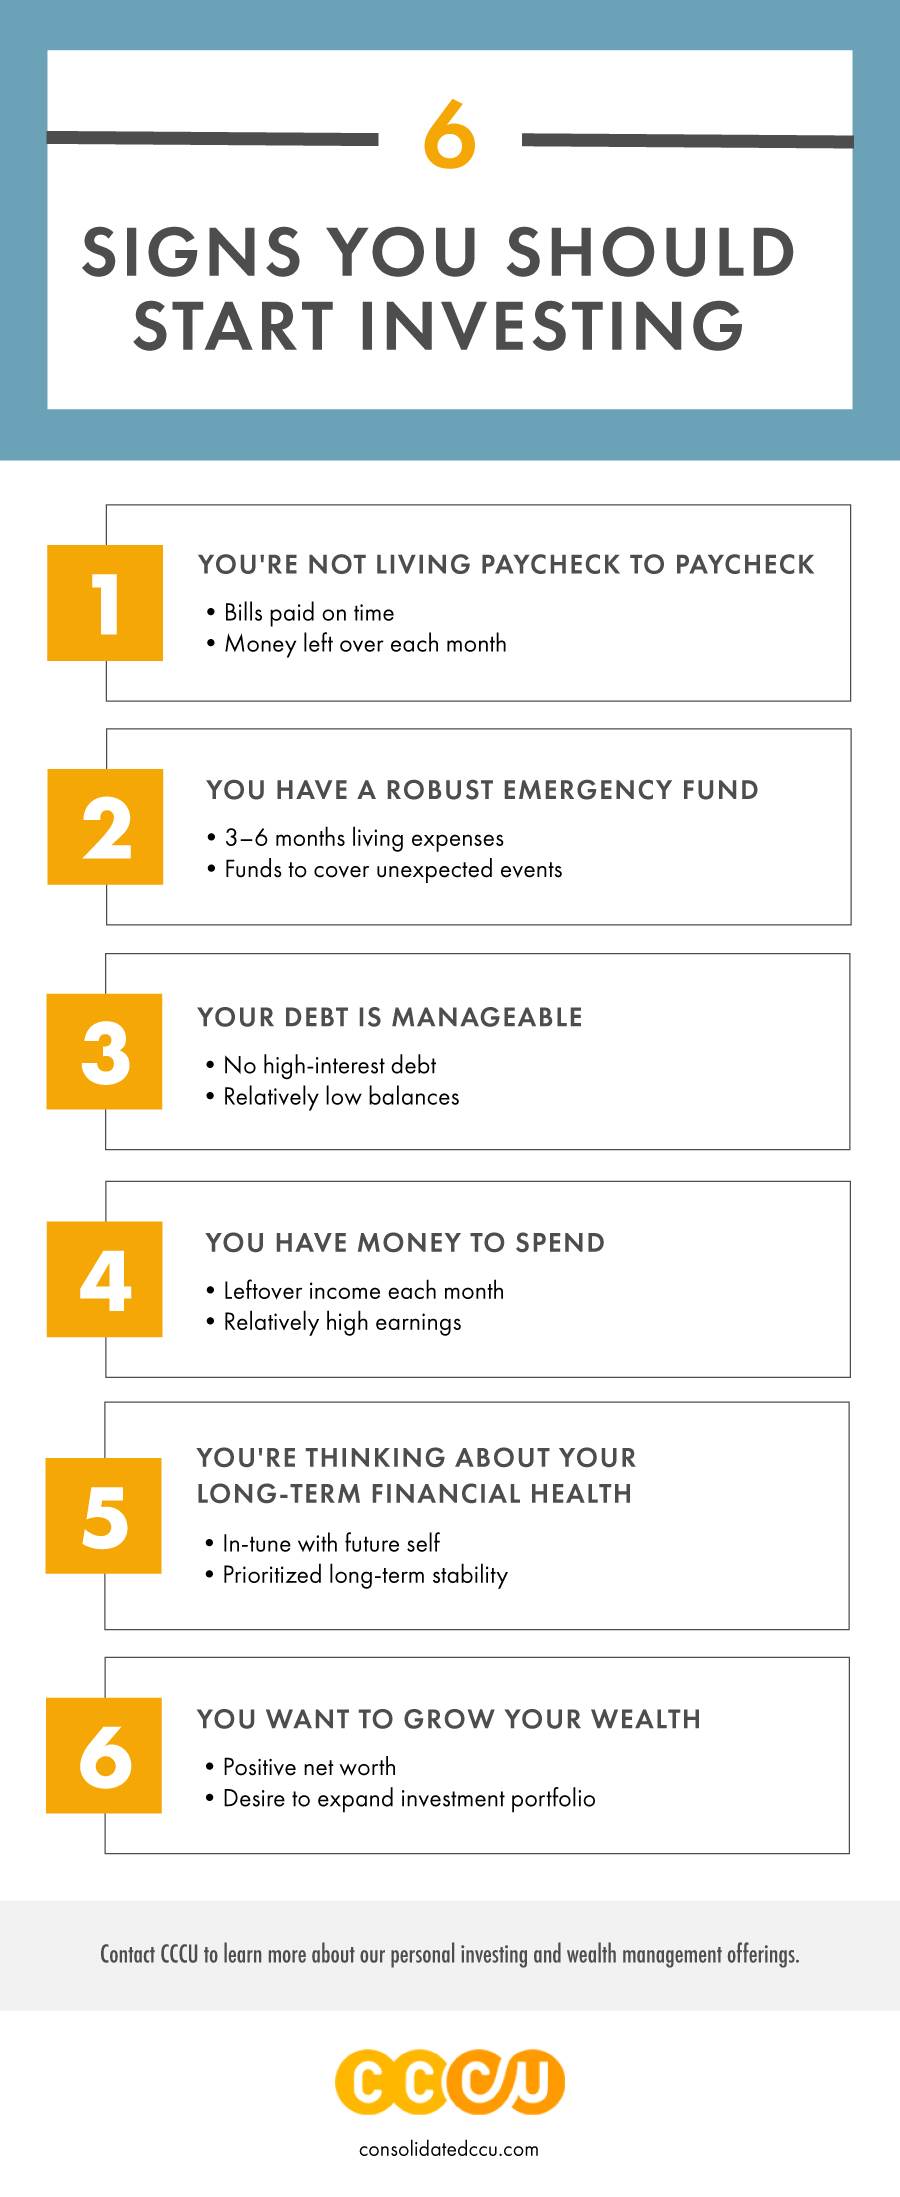 6 signs you should start investing infographic.